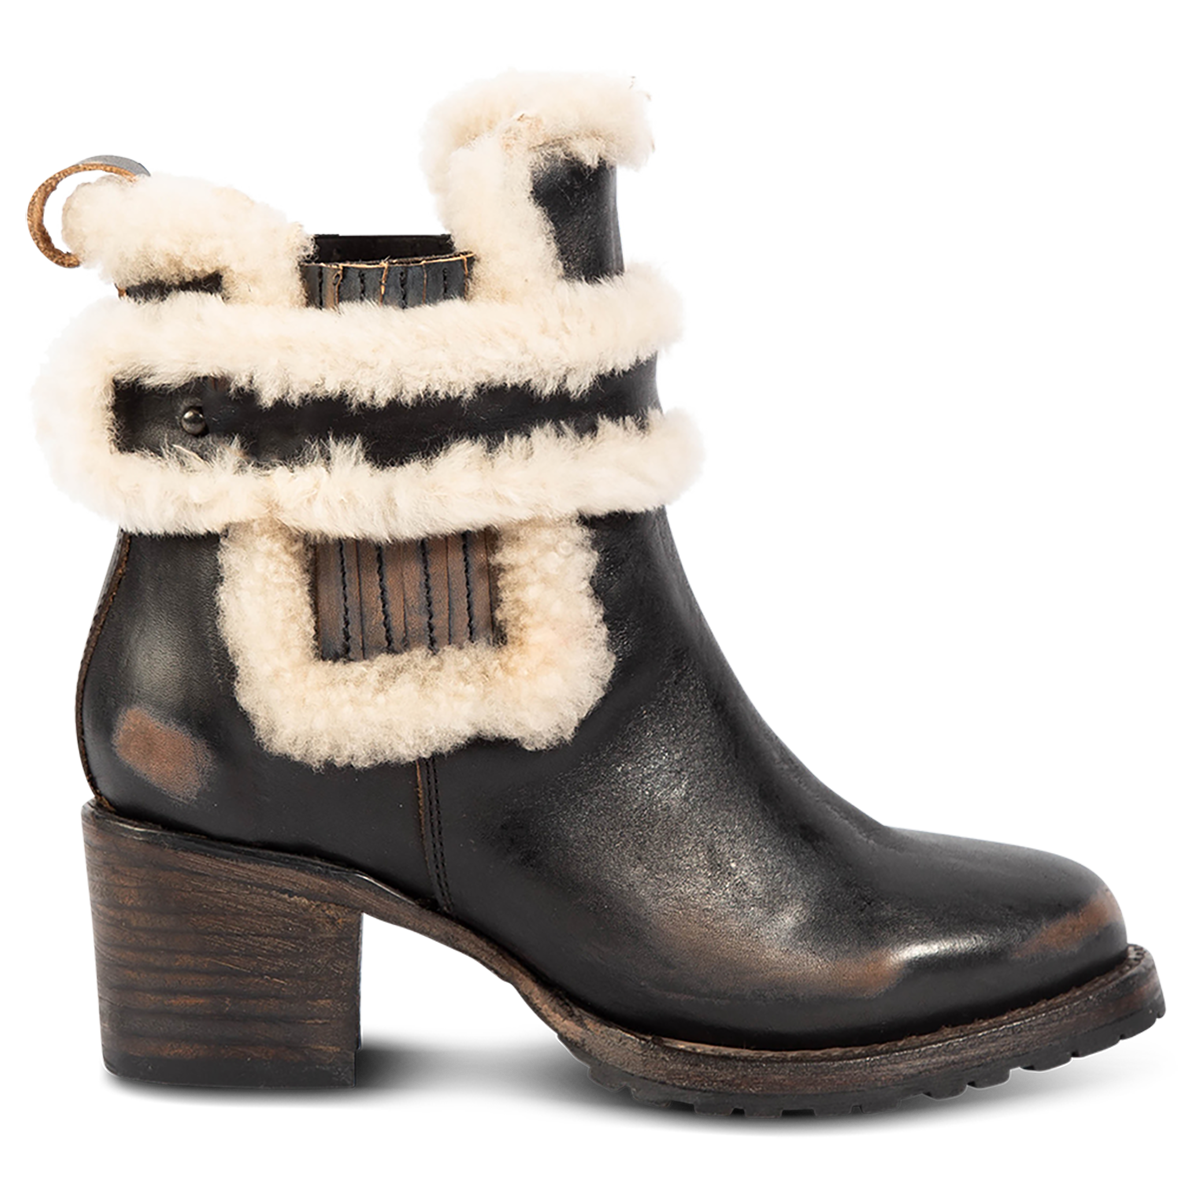 FREEBIRD women's Neverland black leather bootie with genuine shearling removable lining, gore detailing and a stacked heel